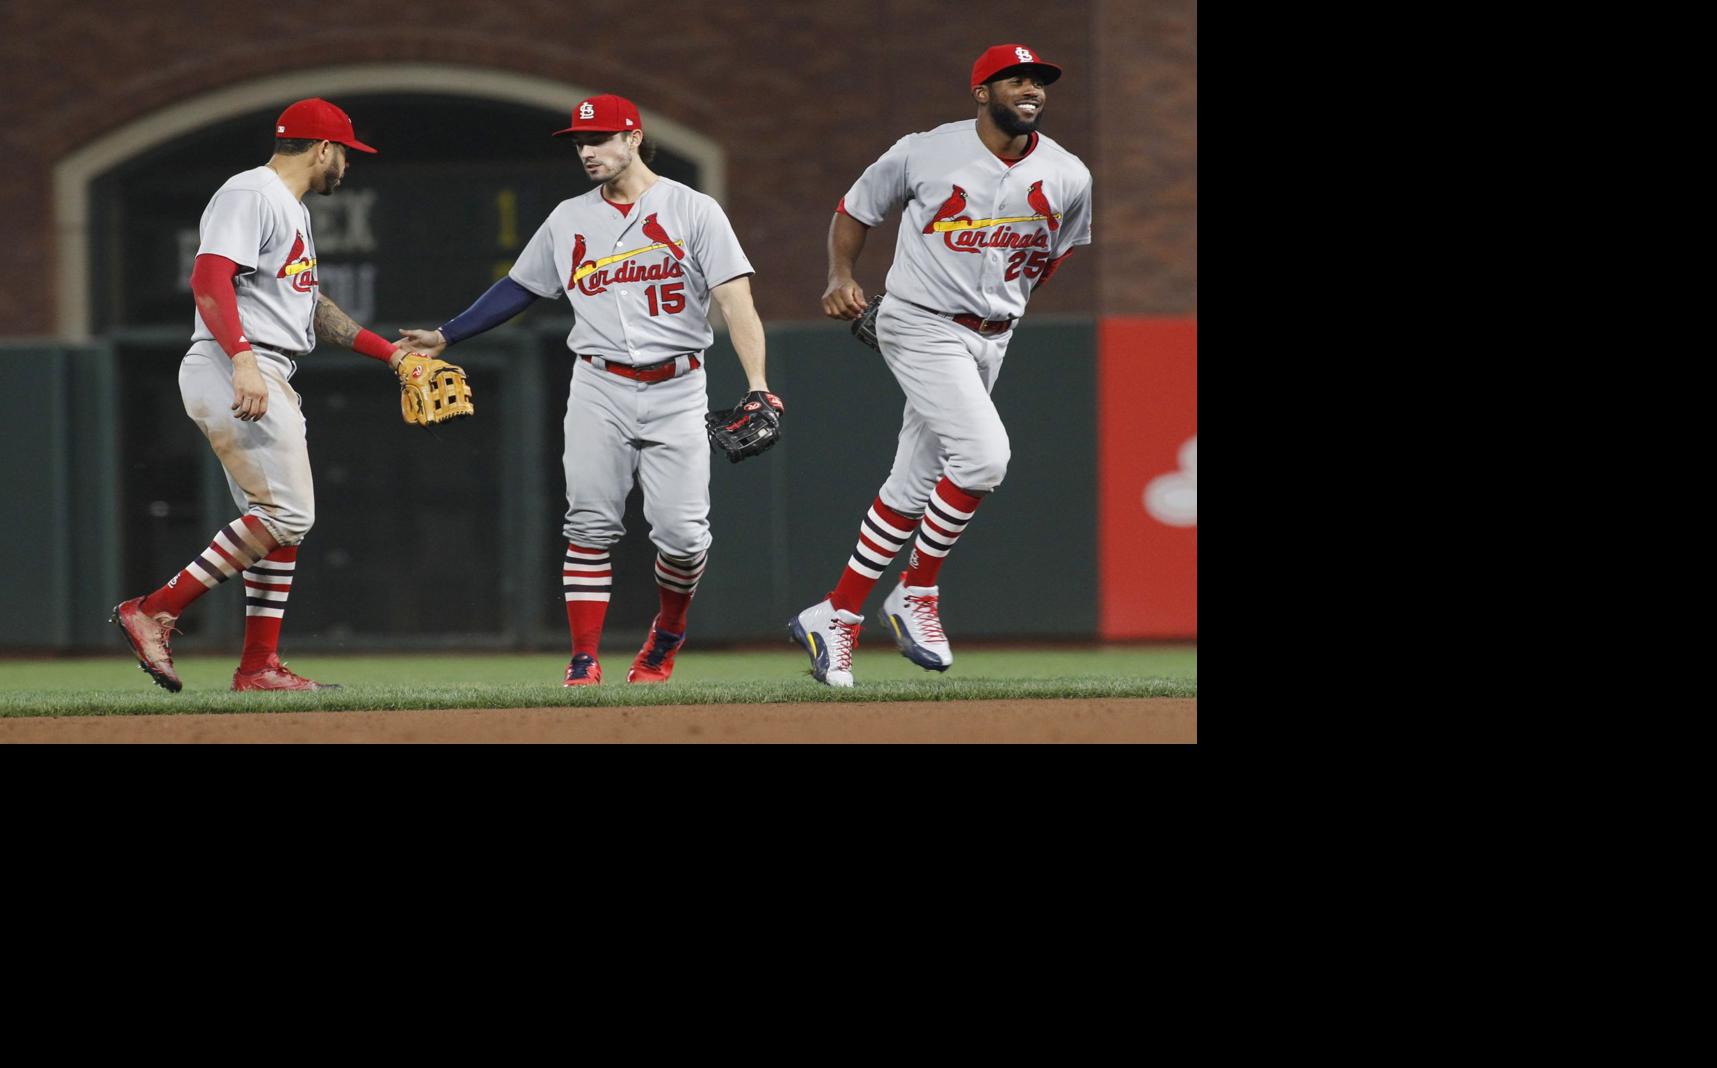 With 6 in the 9th, Cardinals rally past Giants St. Louis Cardinals